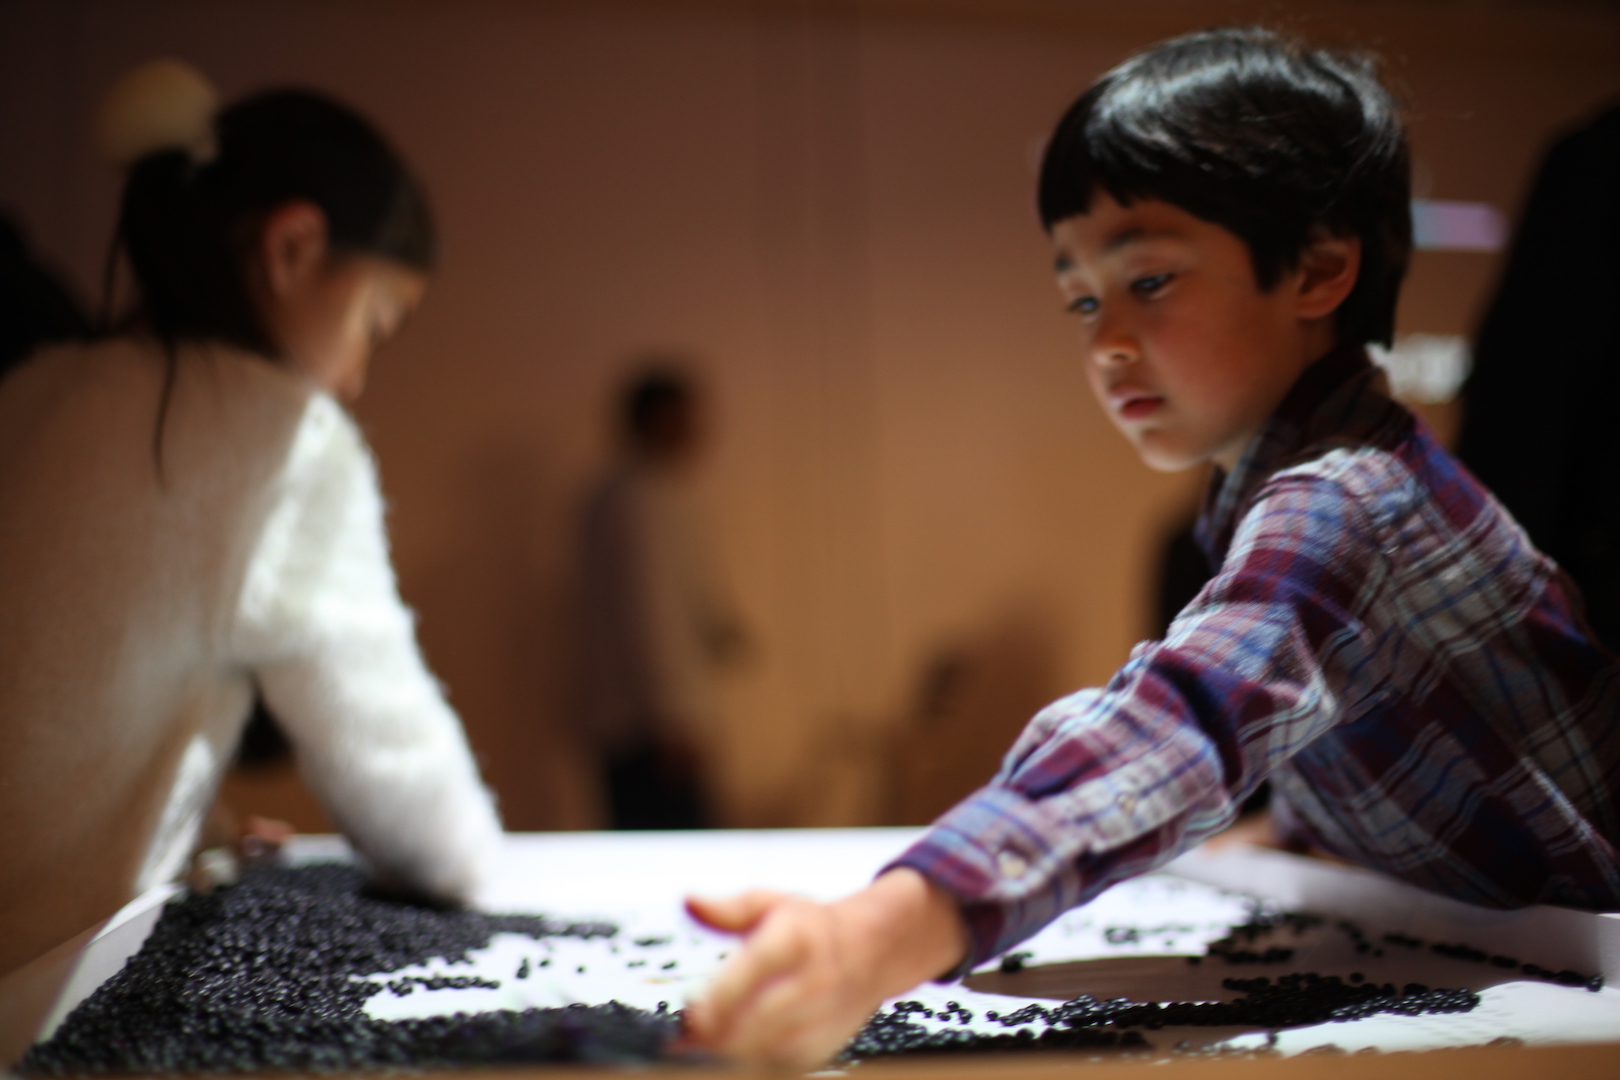 a boy and girl moving around dried black beans